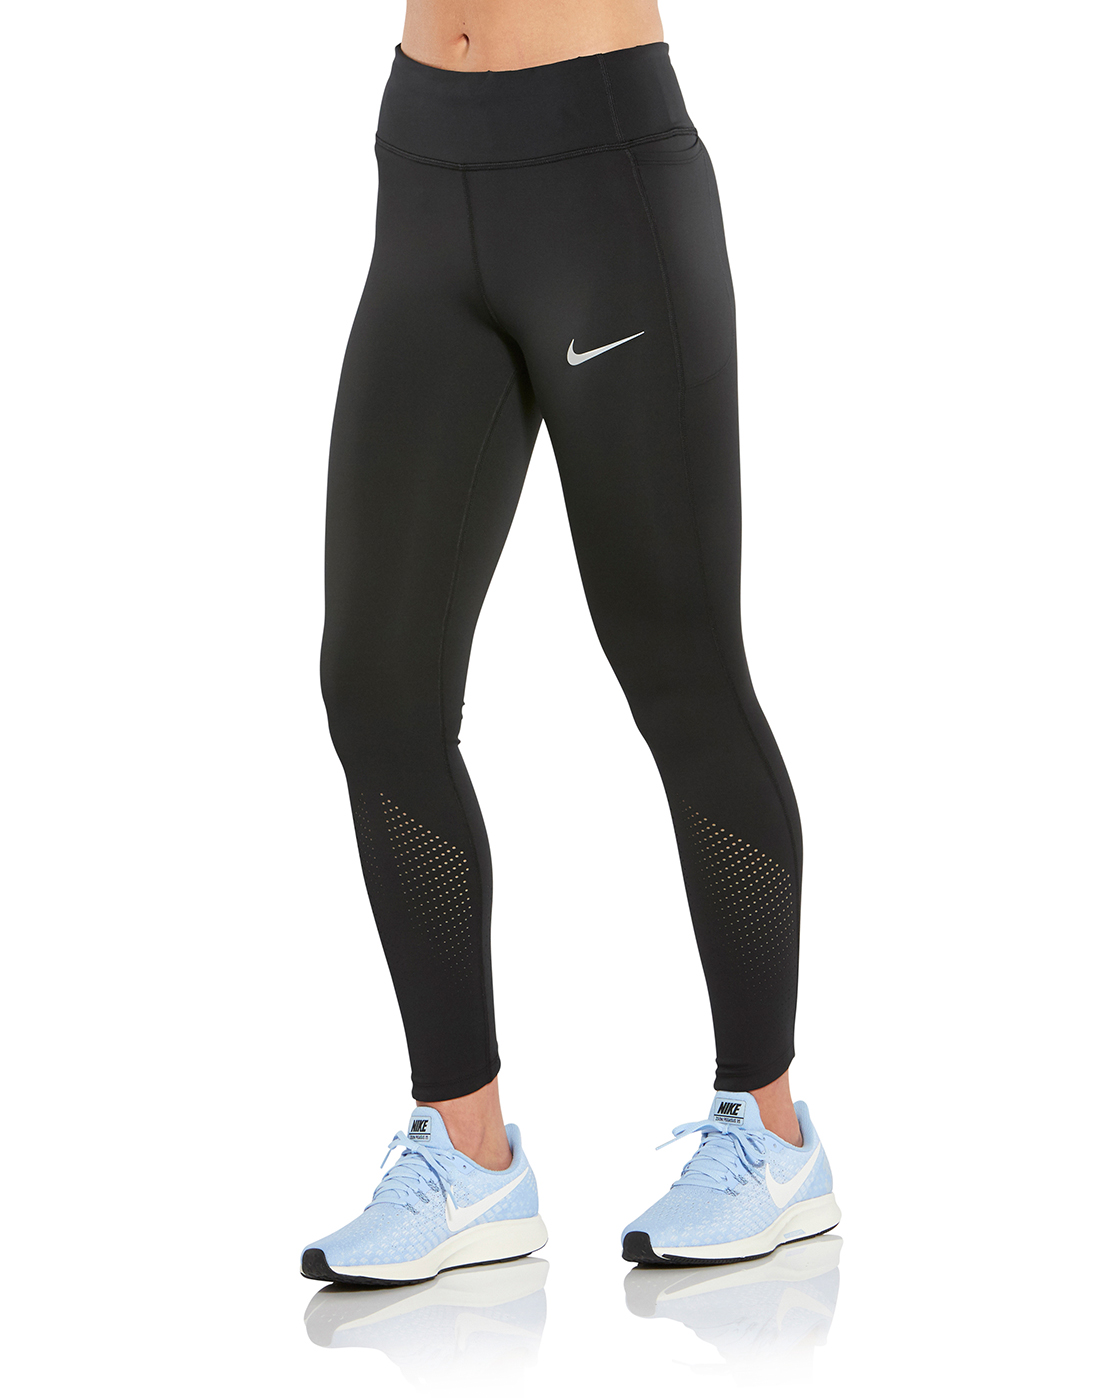 nike epic lux women's running tights